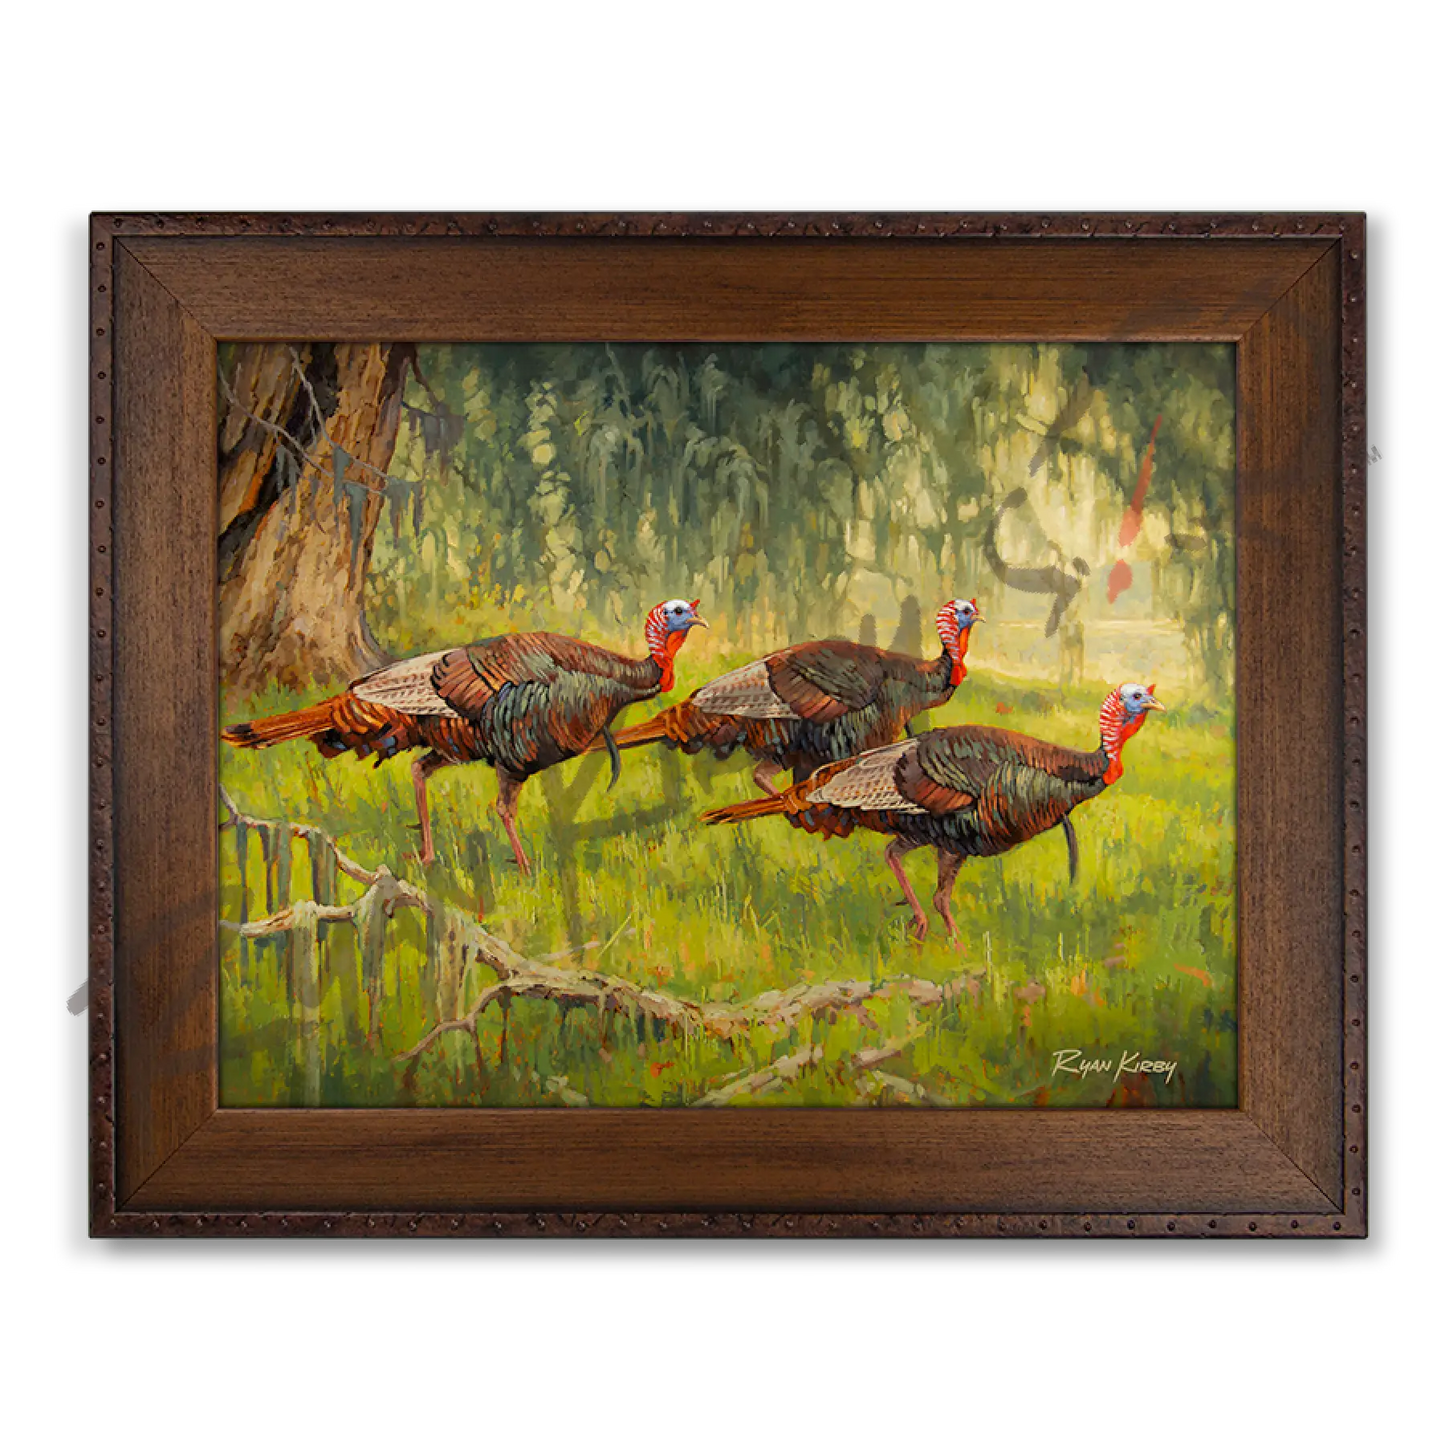 ’Bottomland Bachelors’ Wild Turkey Canvas Art Print With Signed Mossy Oak Stamp Copper Barrel